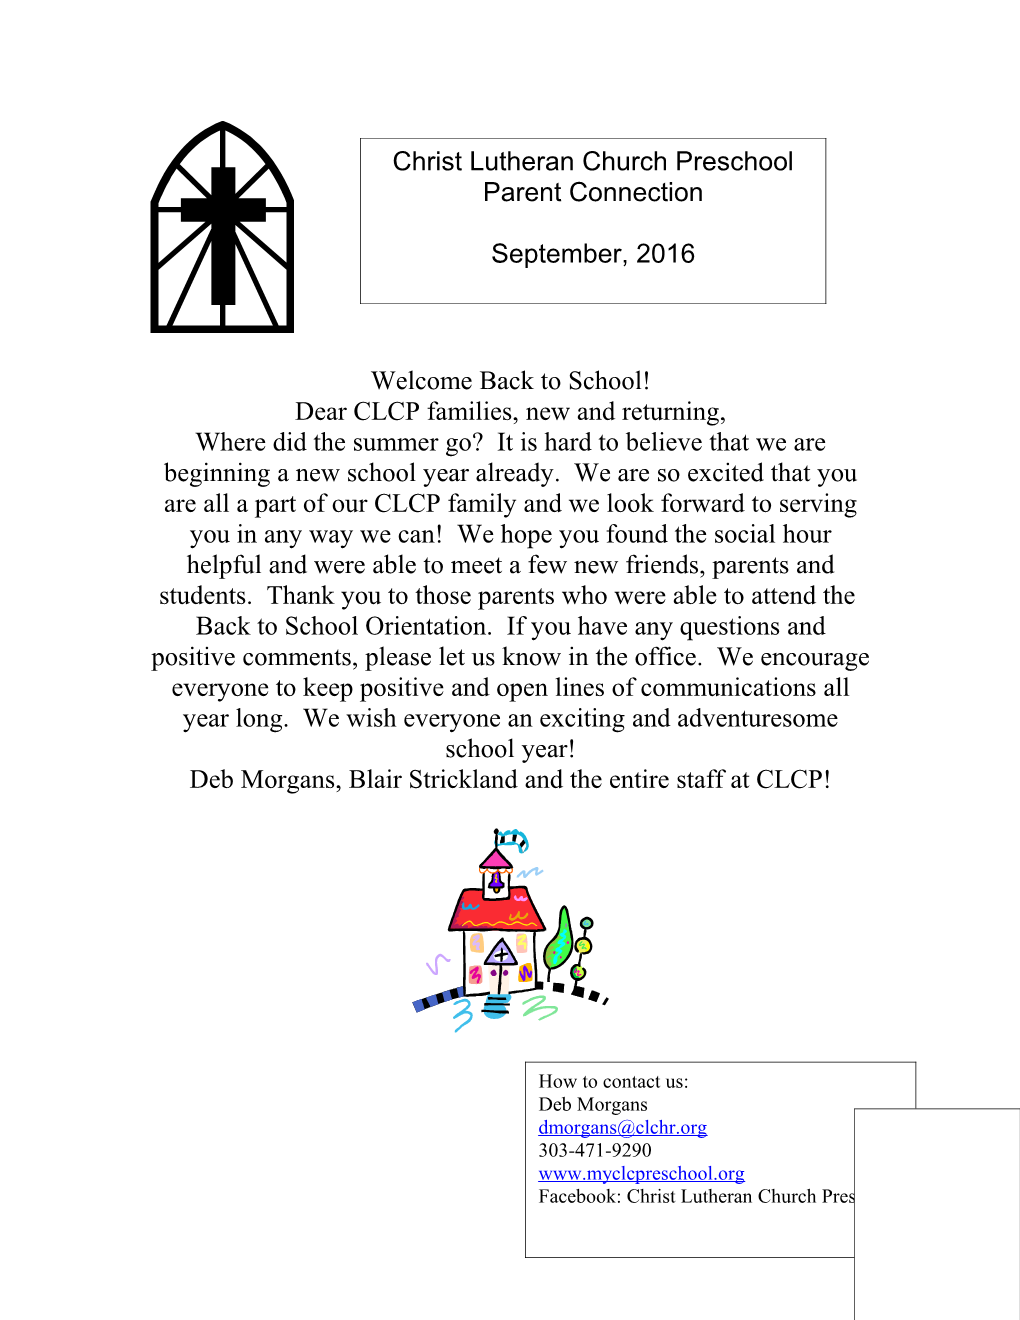 Dear CLCP Families, New and Returning